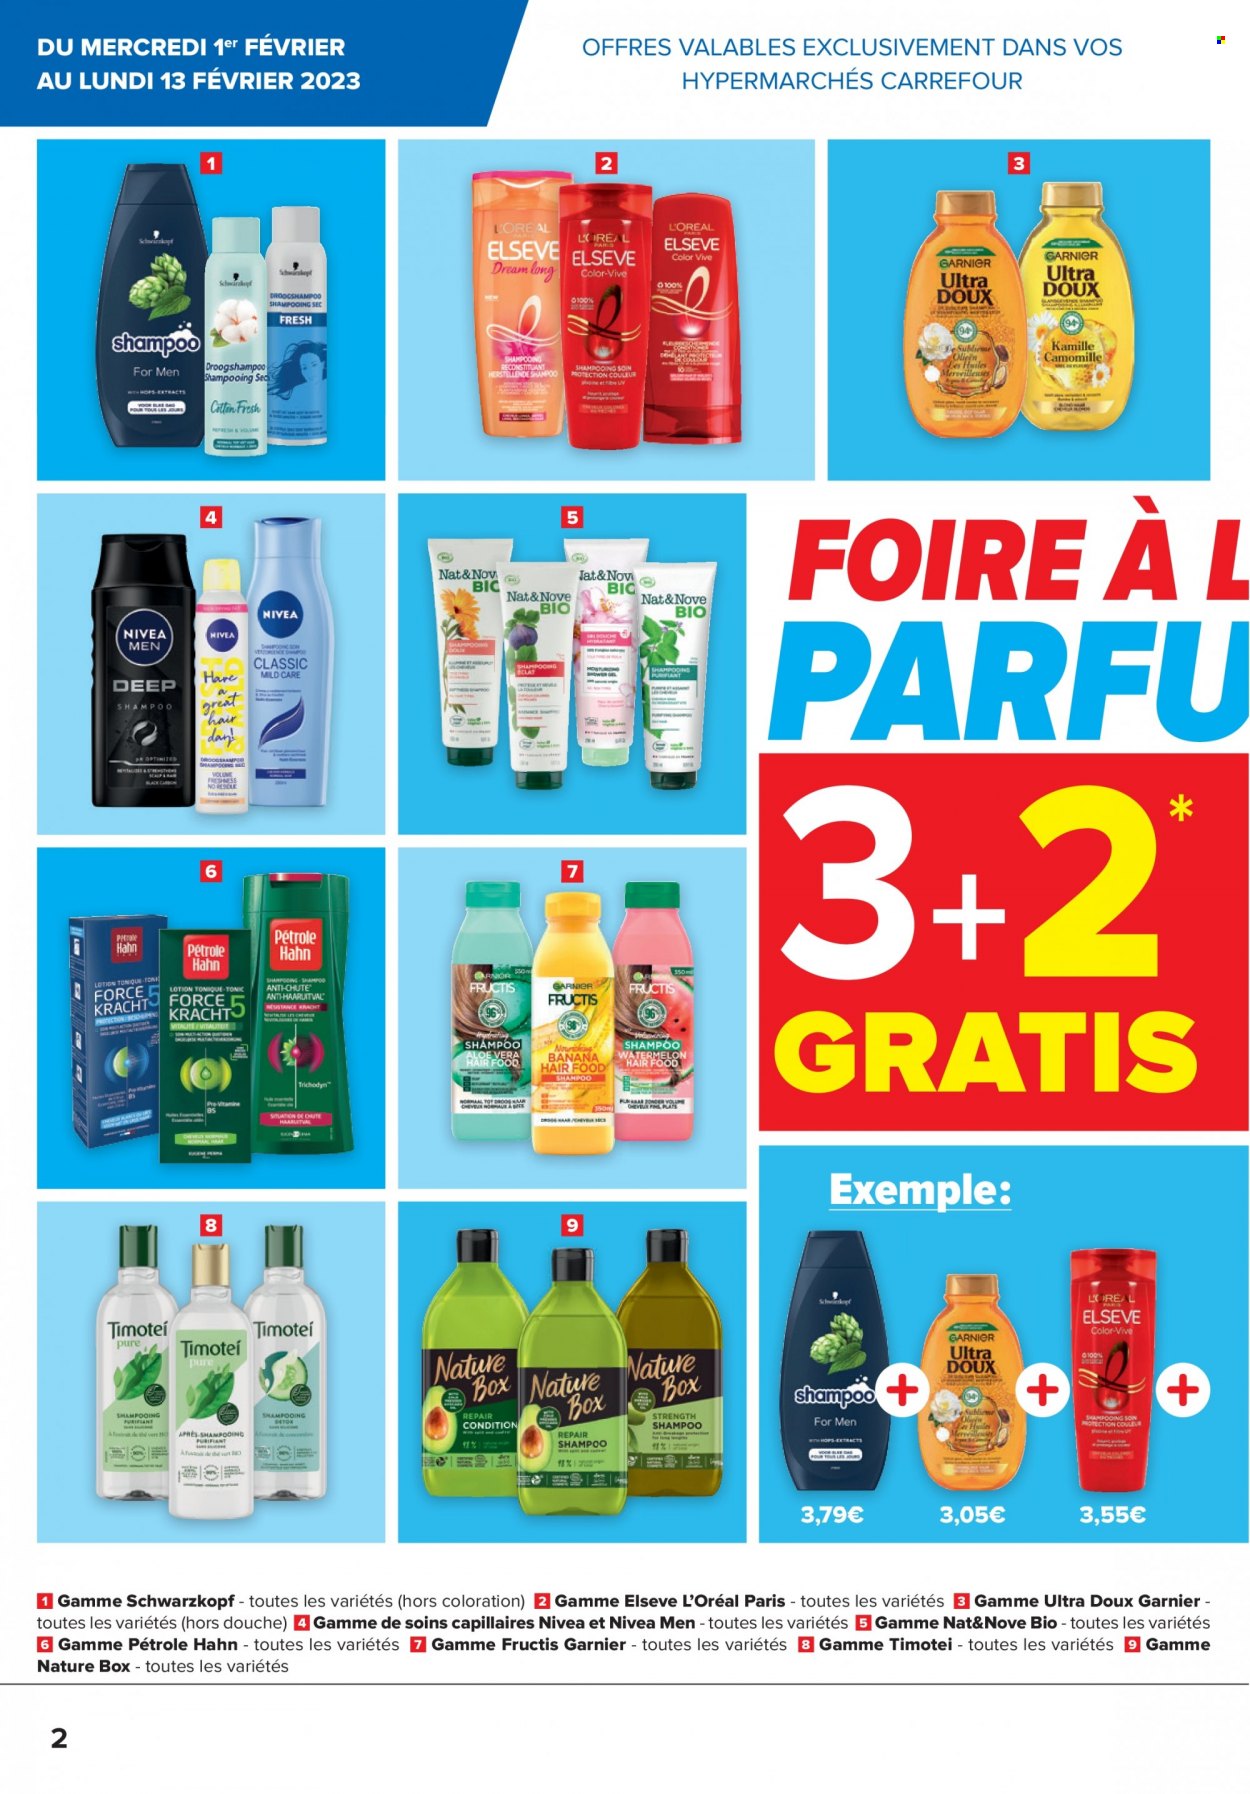 Catalogue Carrefour hypermarkt - 1.2.2023 - 13.2.2023. Page 2.